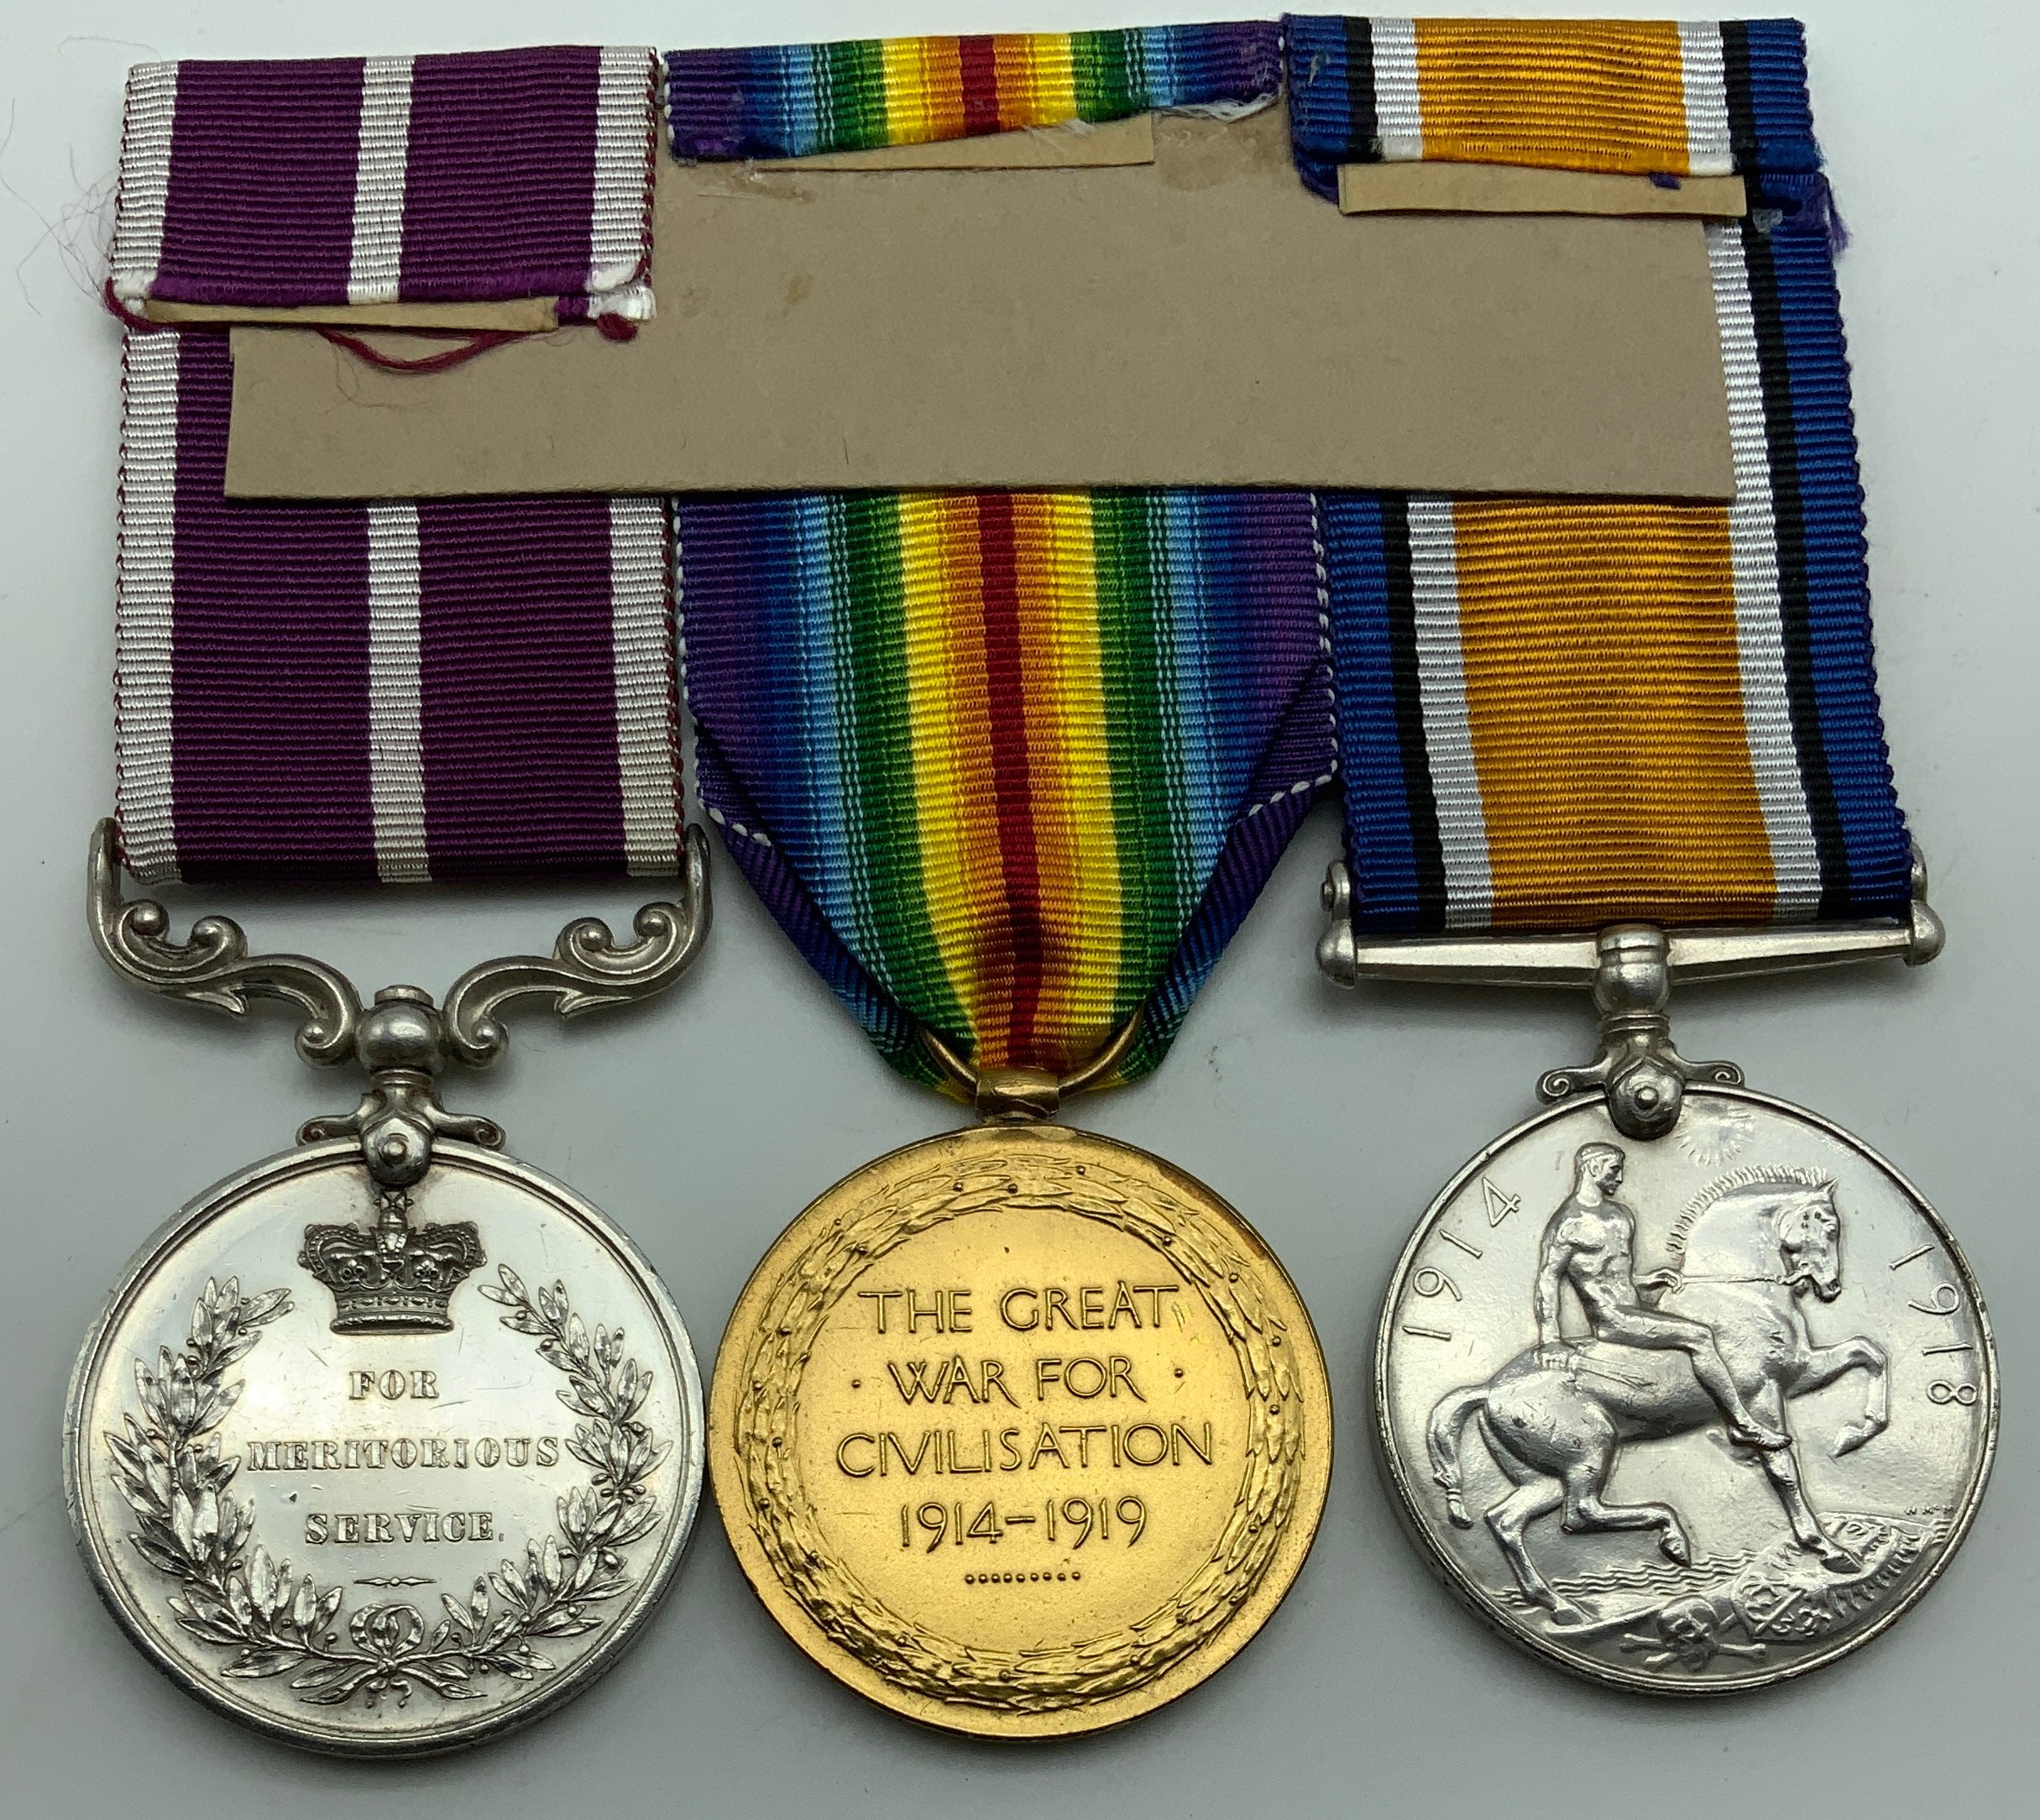 WWI GROUP OF THREE MEDALS INCLUDING ‘FOR MERITORIOUS SERVICE’ MEDAL SJT.C.ROBERTSON. R.A. - Image 2 of 2